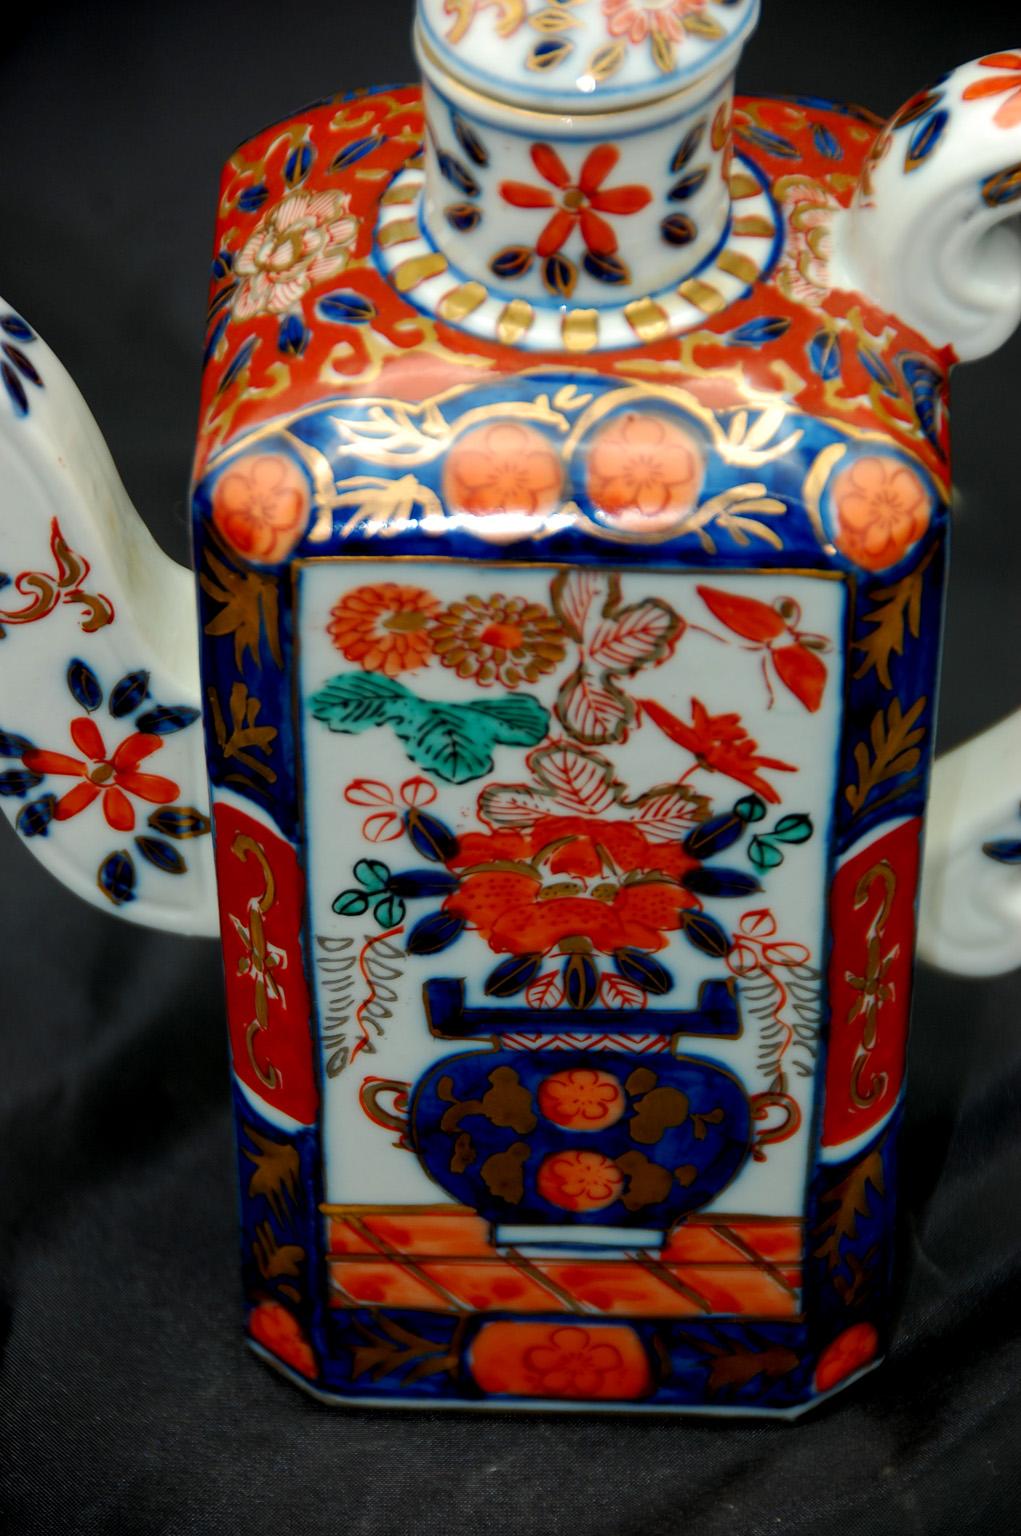 Japanese Meiji period Imari Saki pot with original lid. This square hand painted in underglaze blue and overglaze enamels saki pot is well decorated using the quintessential 